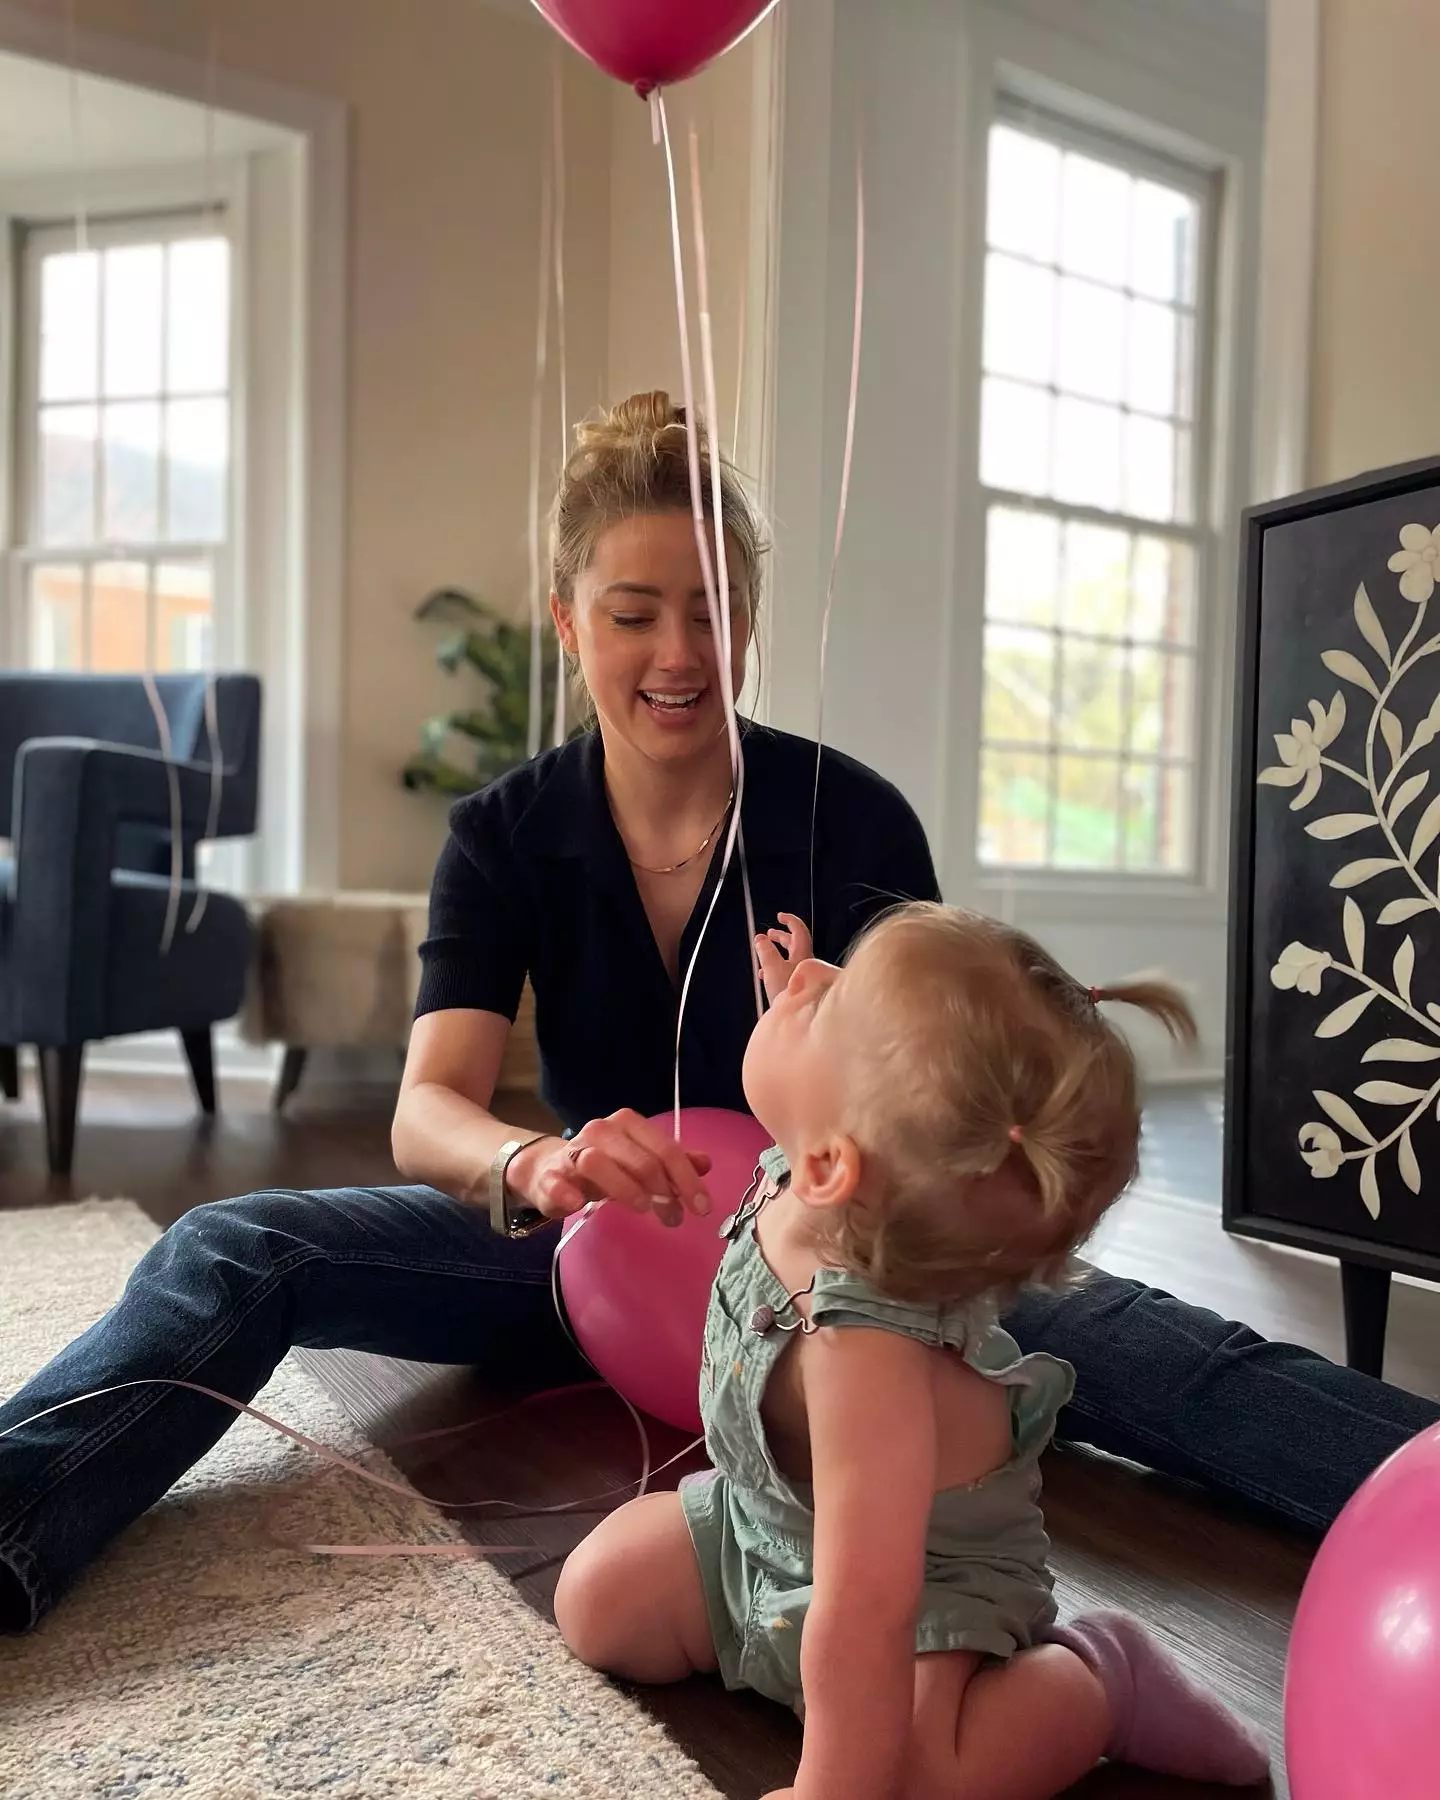 Heard is mom to a three-year-old daughter. (@amberheard/Instagram)